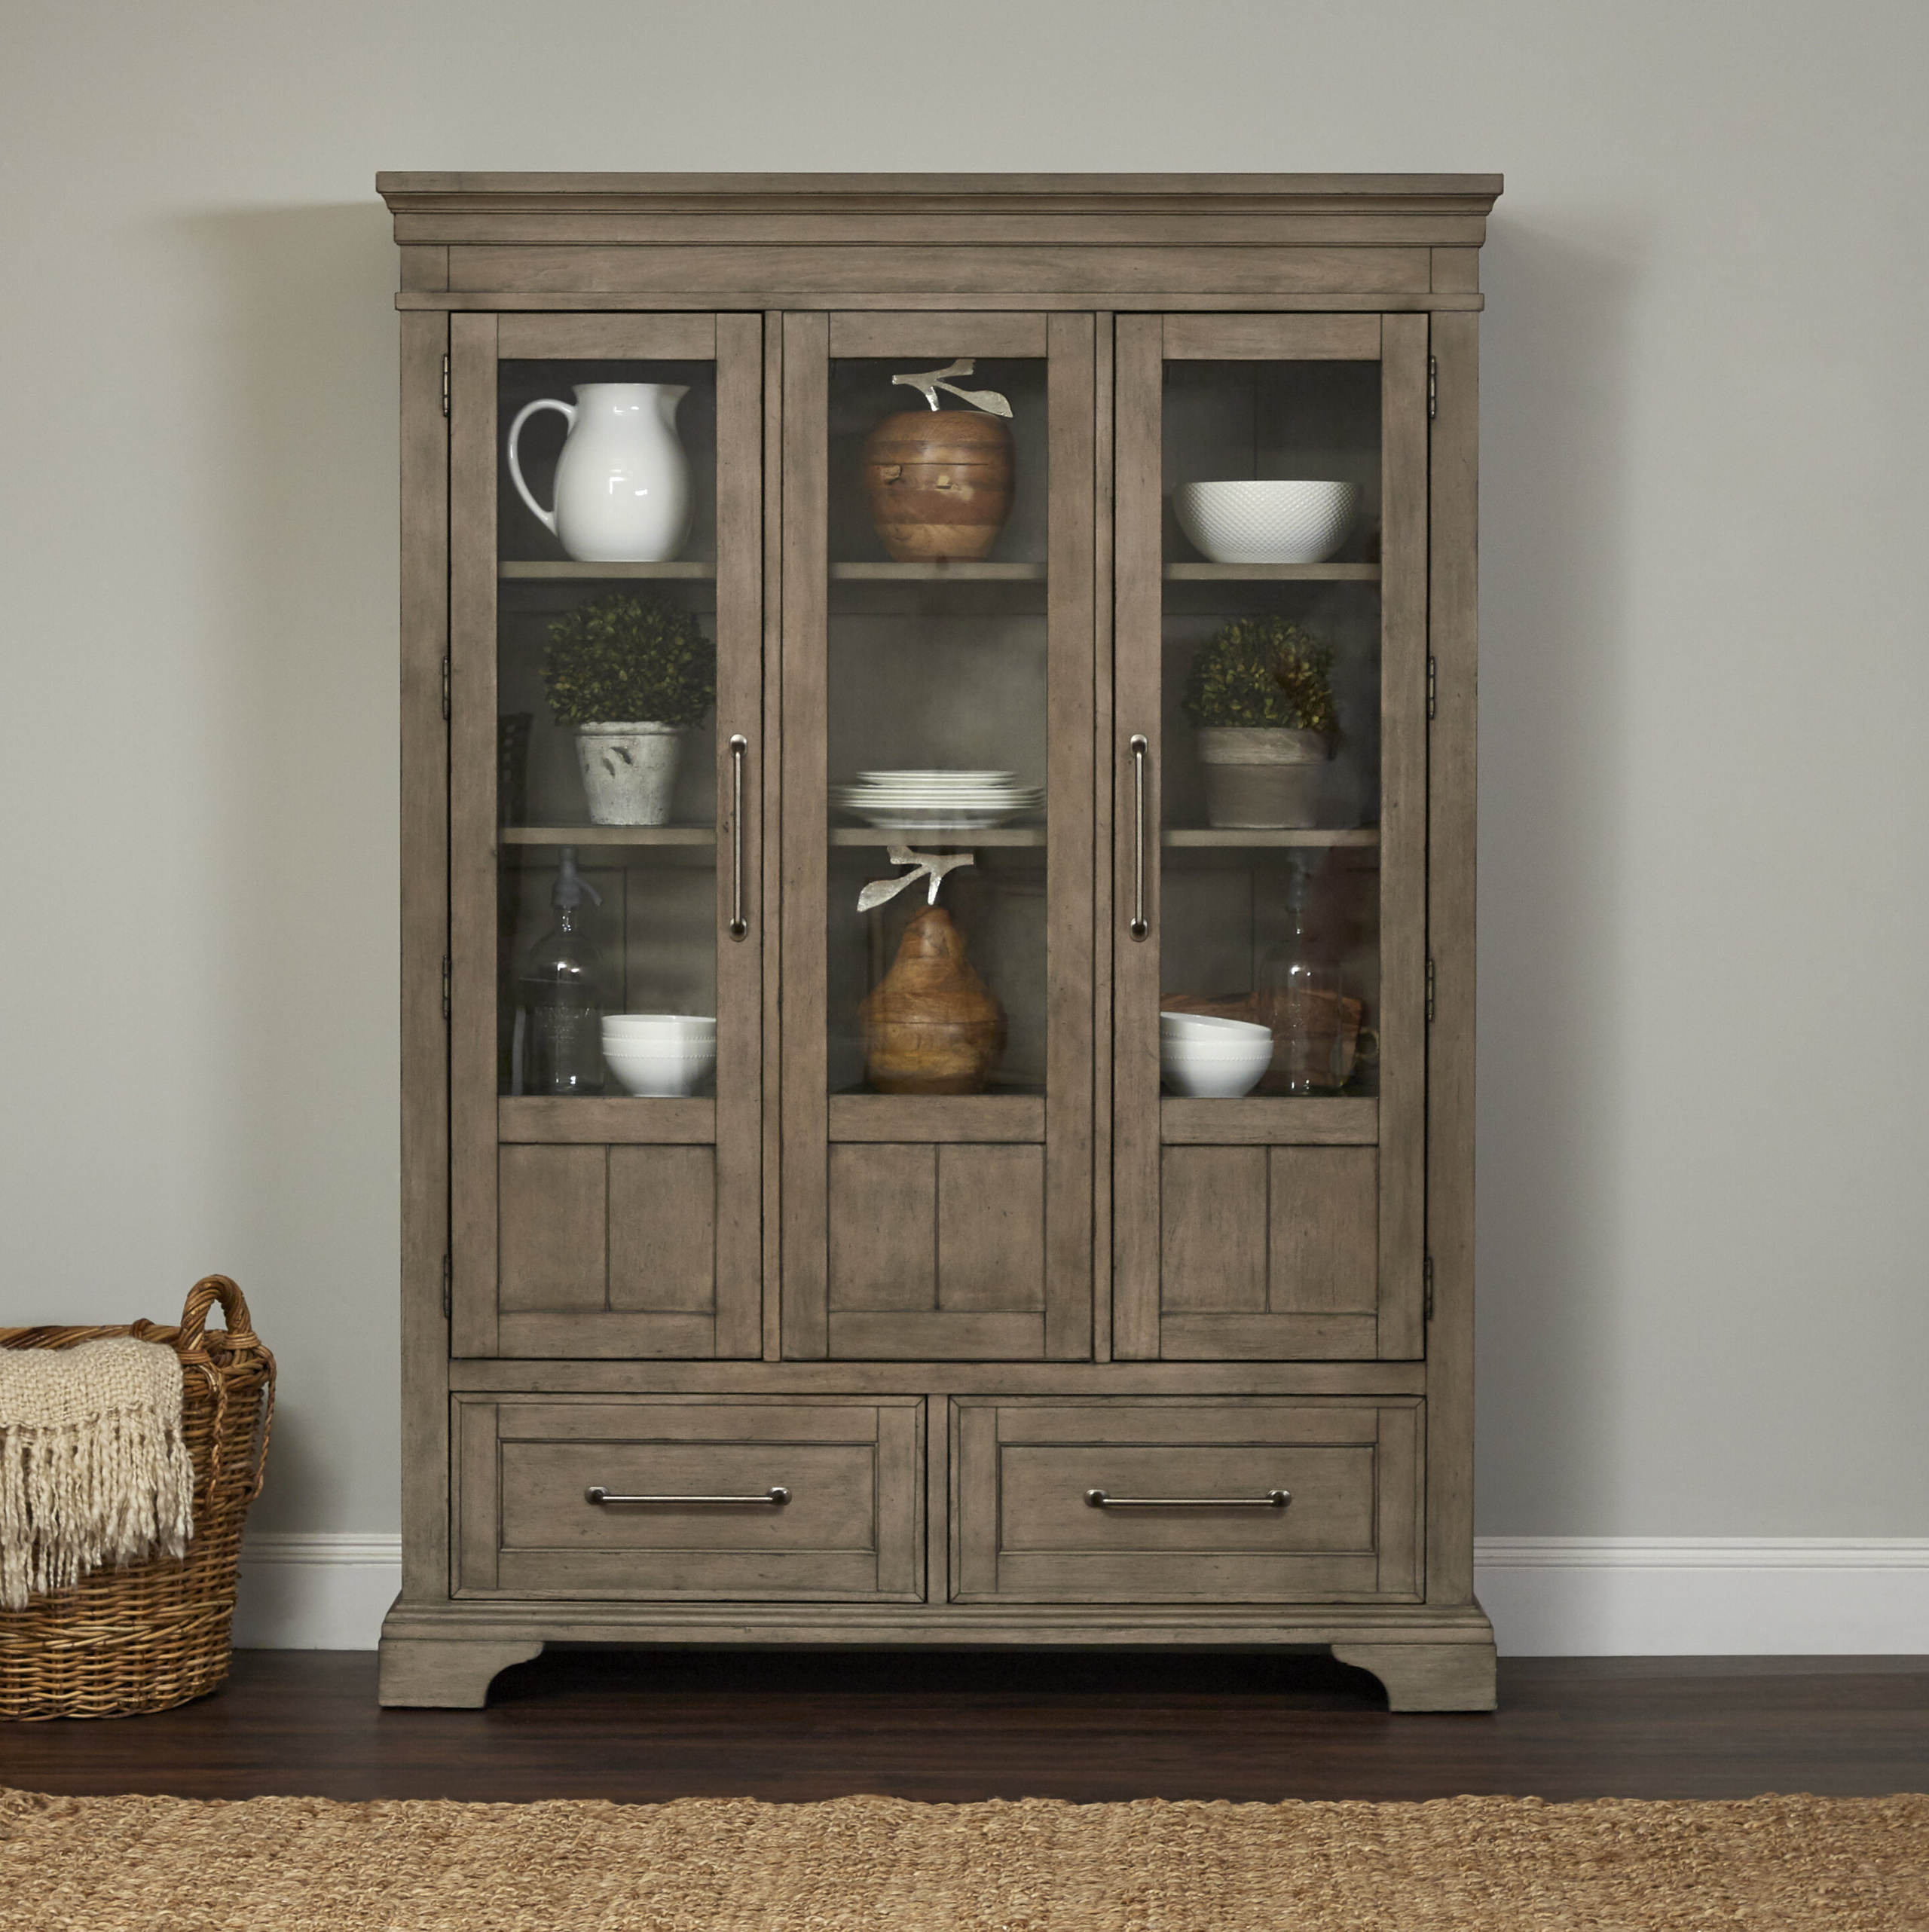 Pride of place: How to choose the perfect display cabinet for home